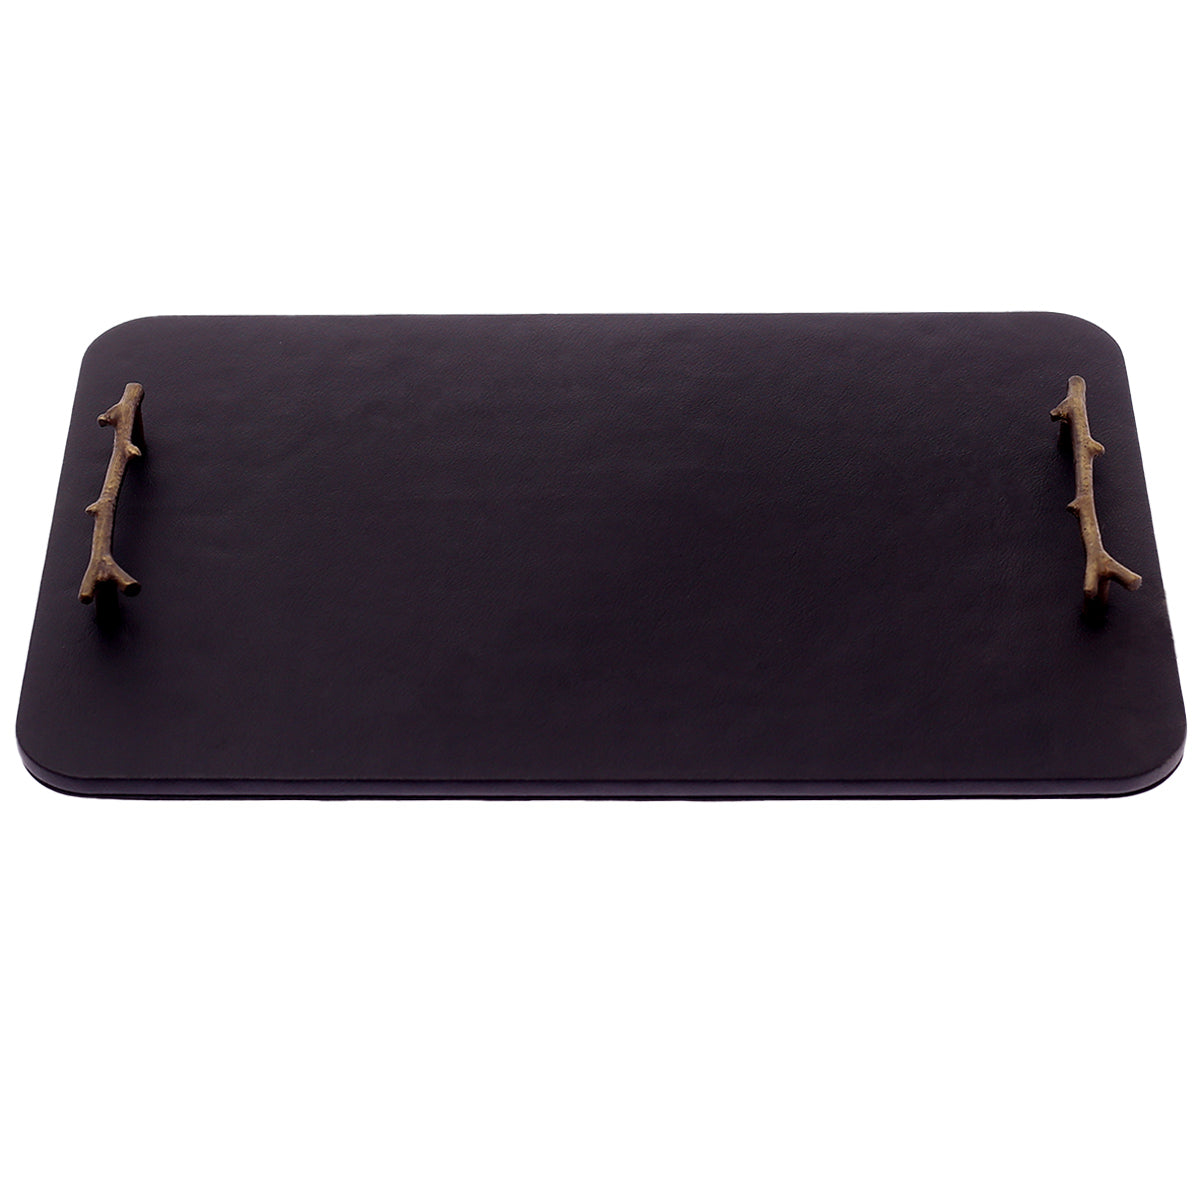 Leather tray (Black)